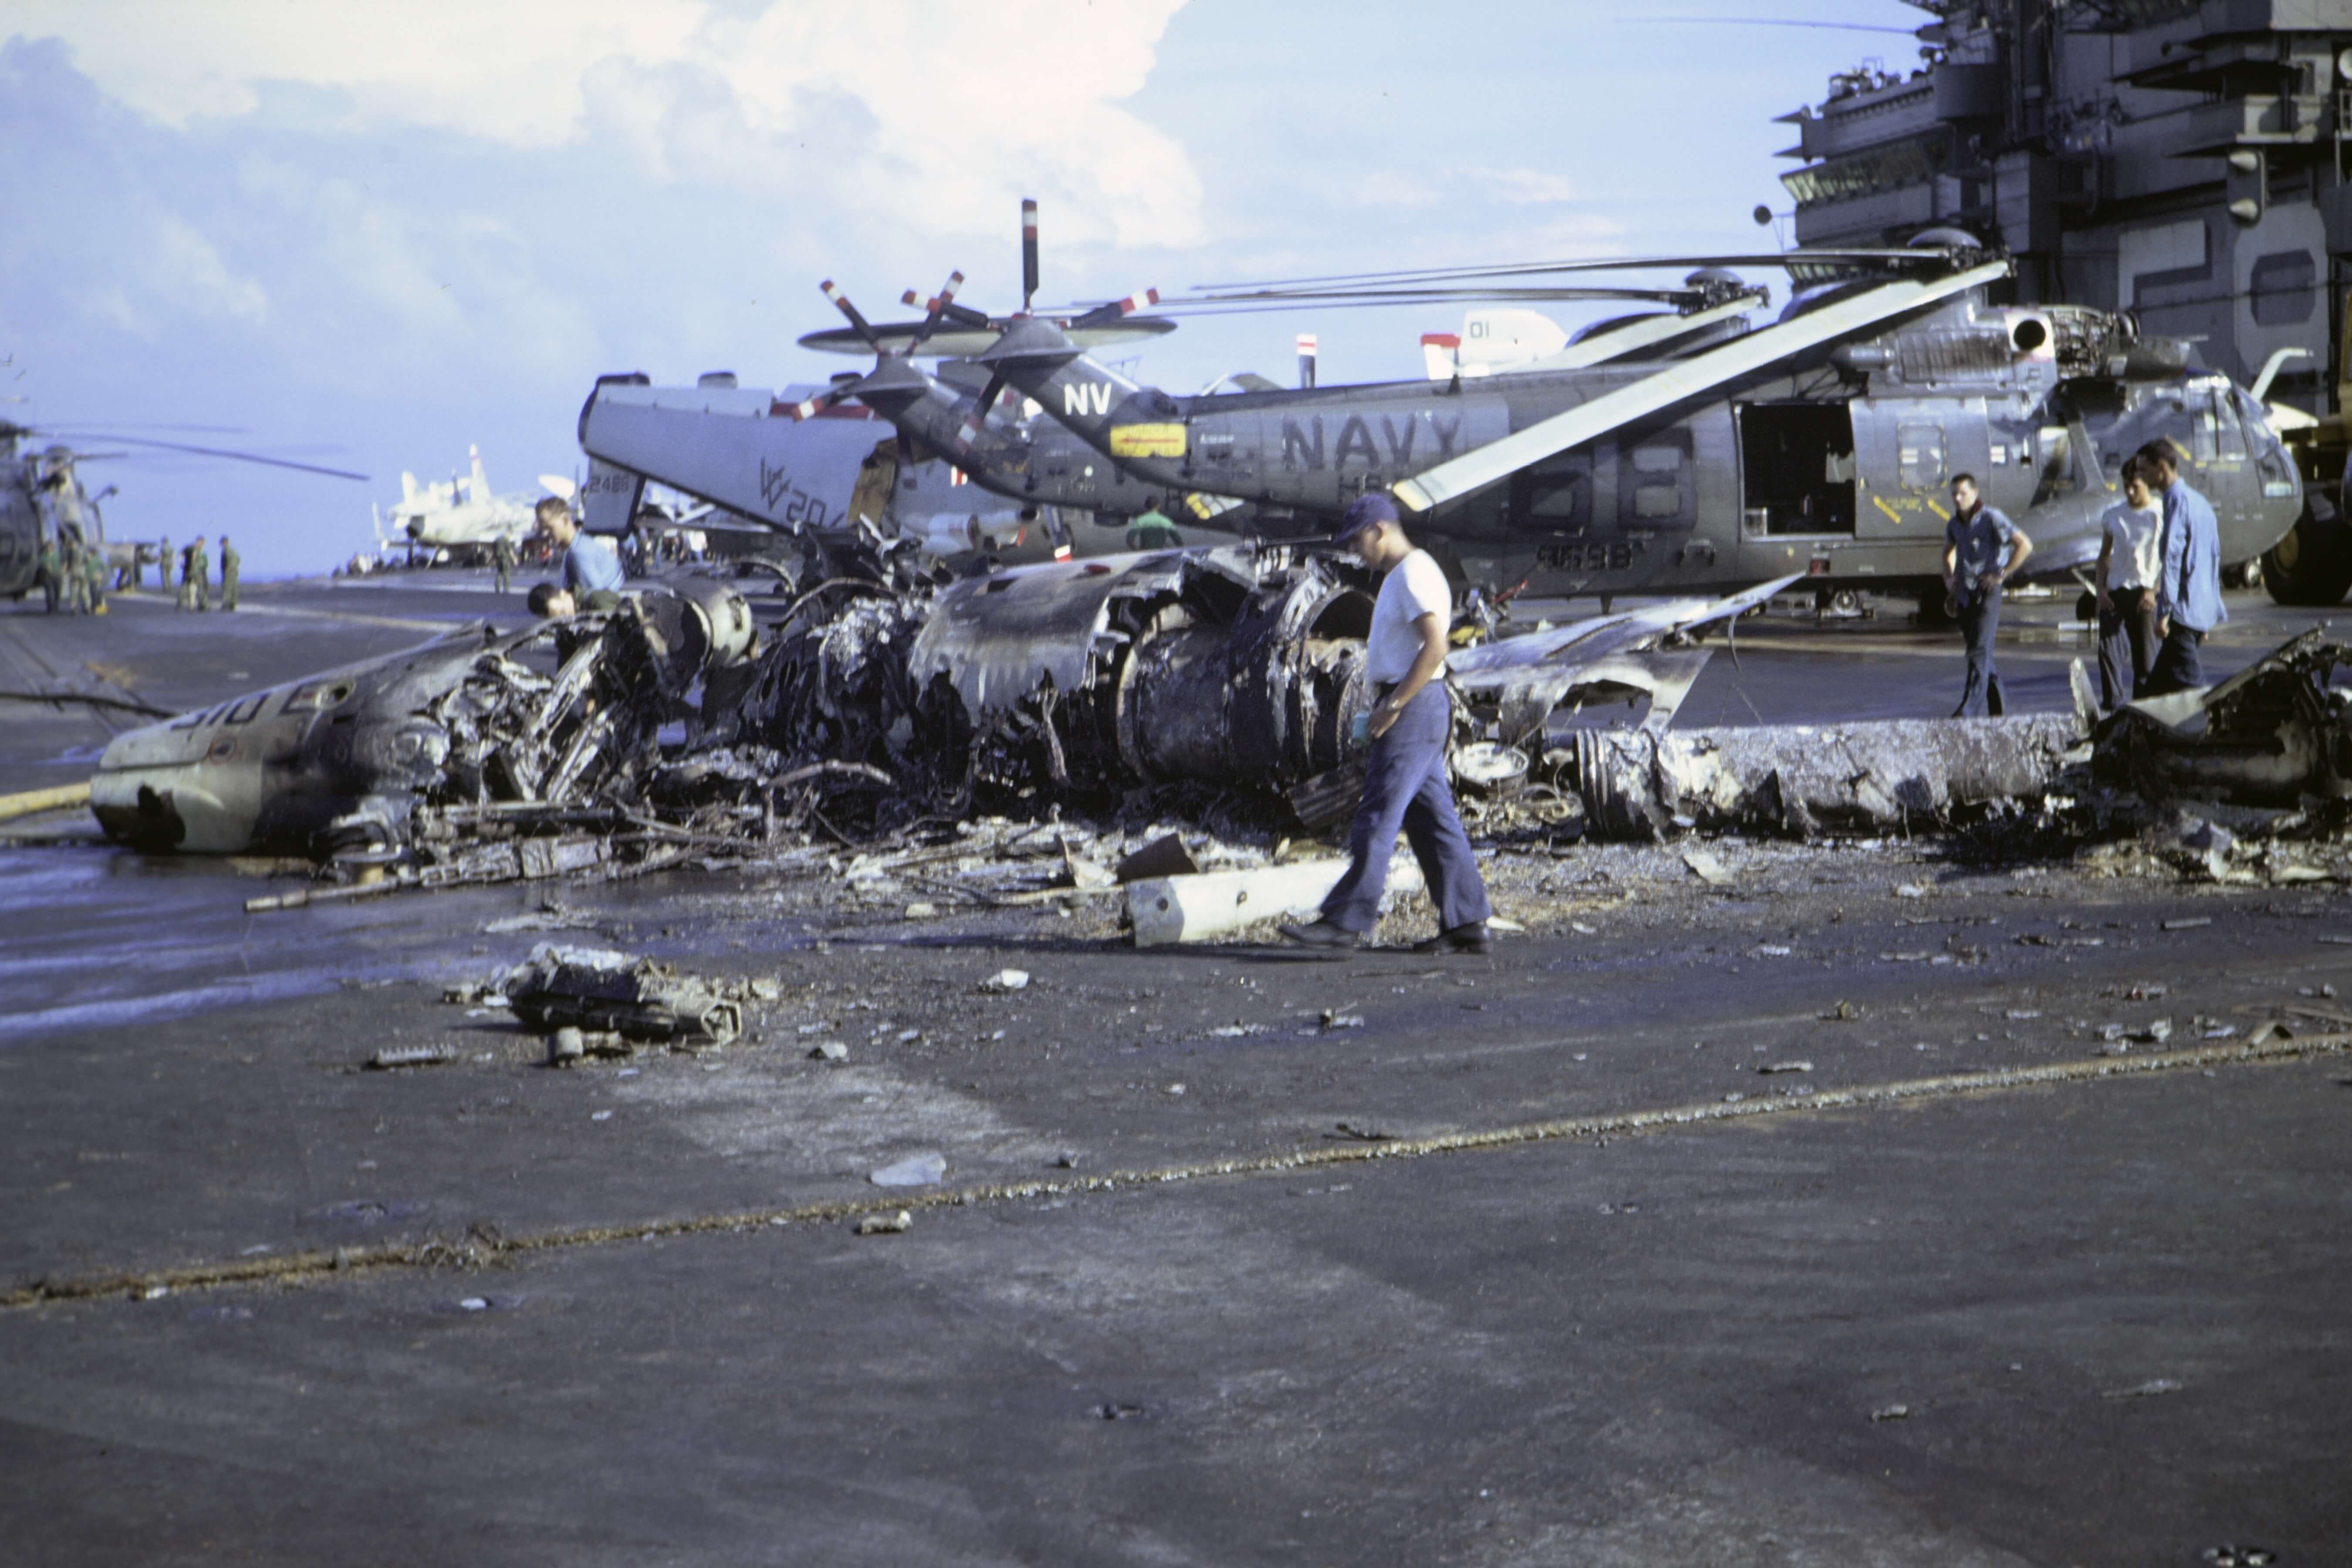 Close up of plane wreckage on top of the deck of a large Navy boat.